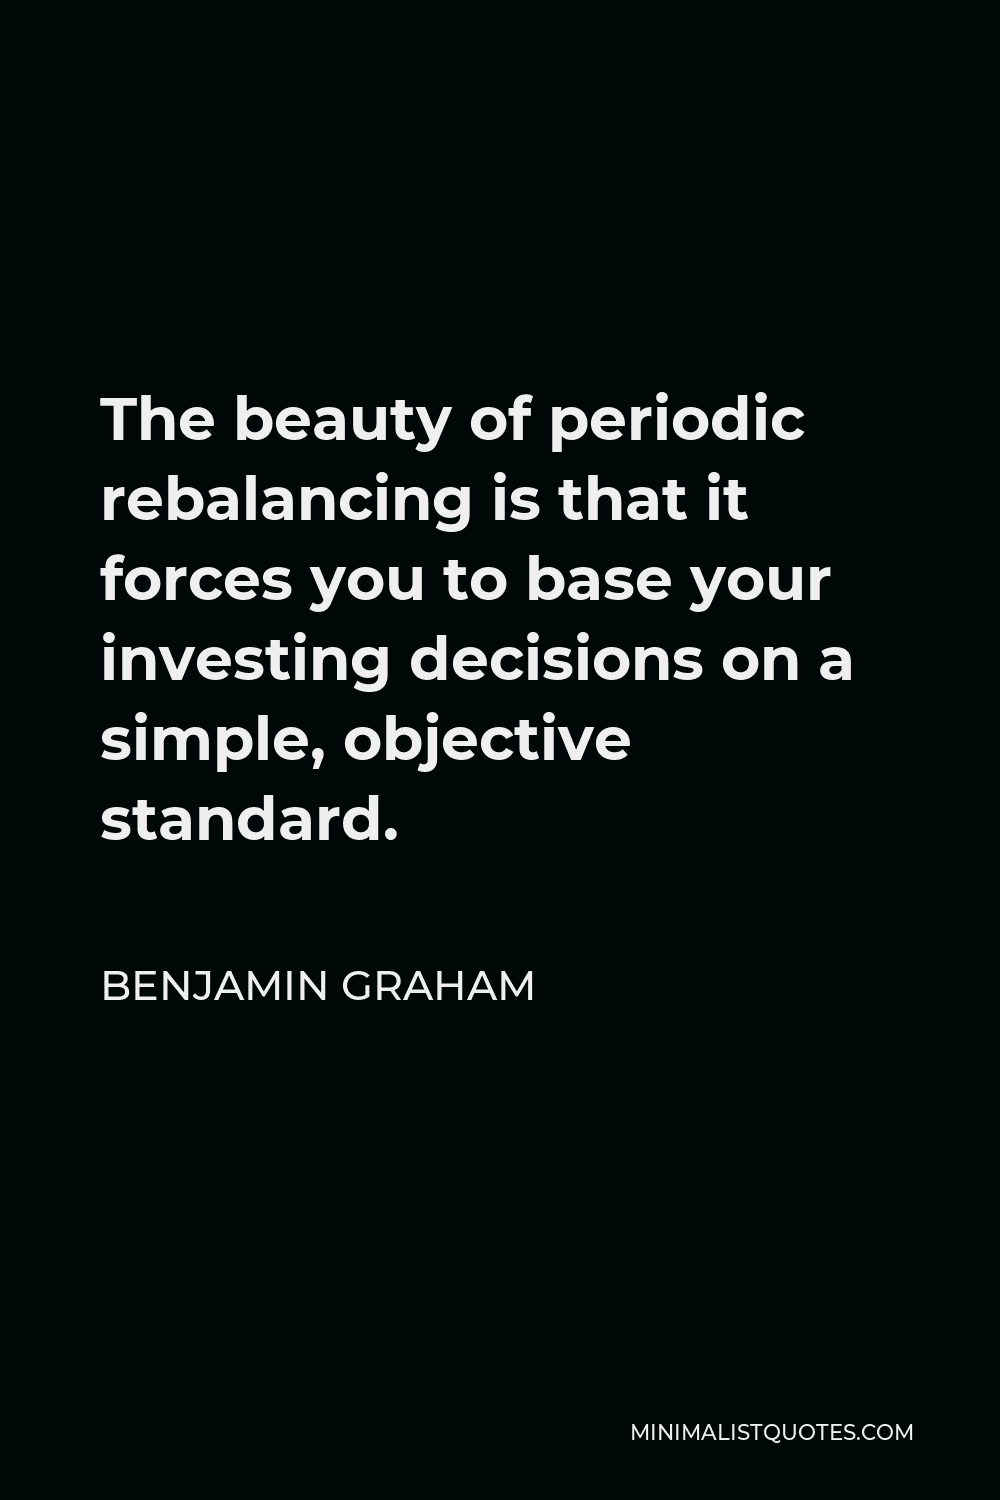 Benjamin Graham Quote - The beauty of periodic rebalancing is that it forces you to base your investing decisions on a simple, objective standard.